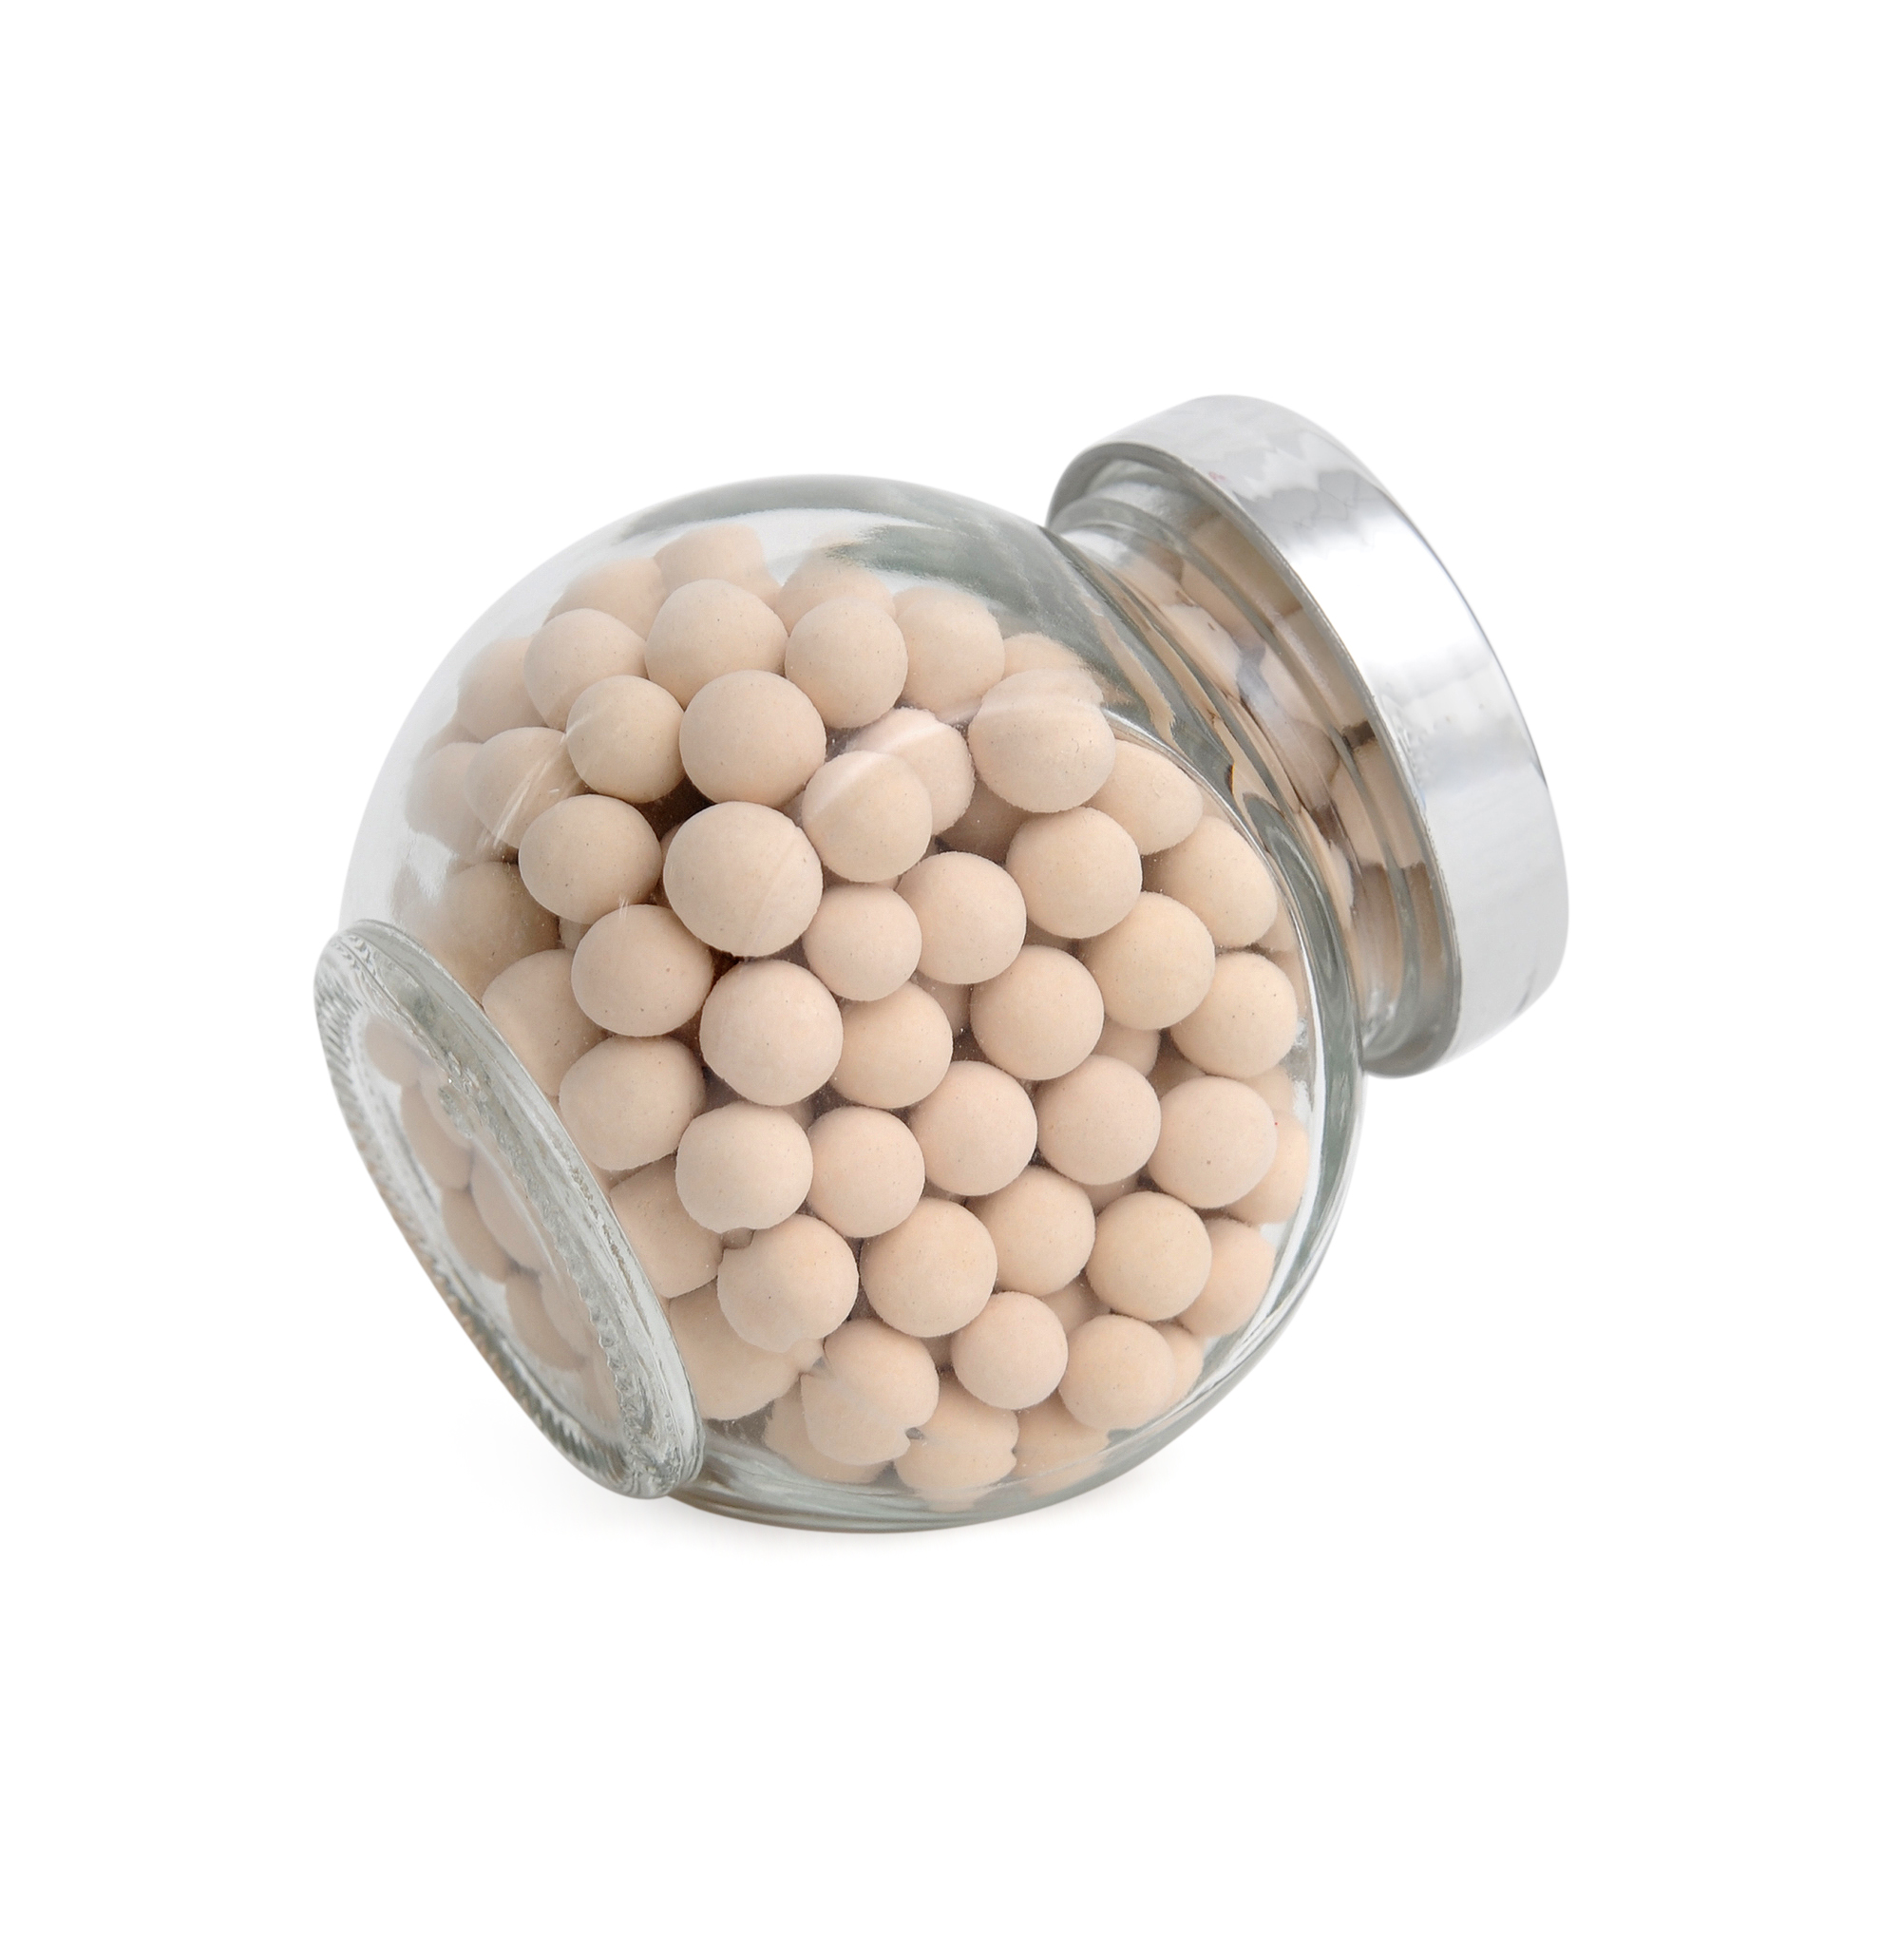 Three THINGS TO KNOW WHEN PURCHASING MOLECULAR SIEVES